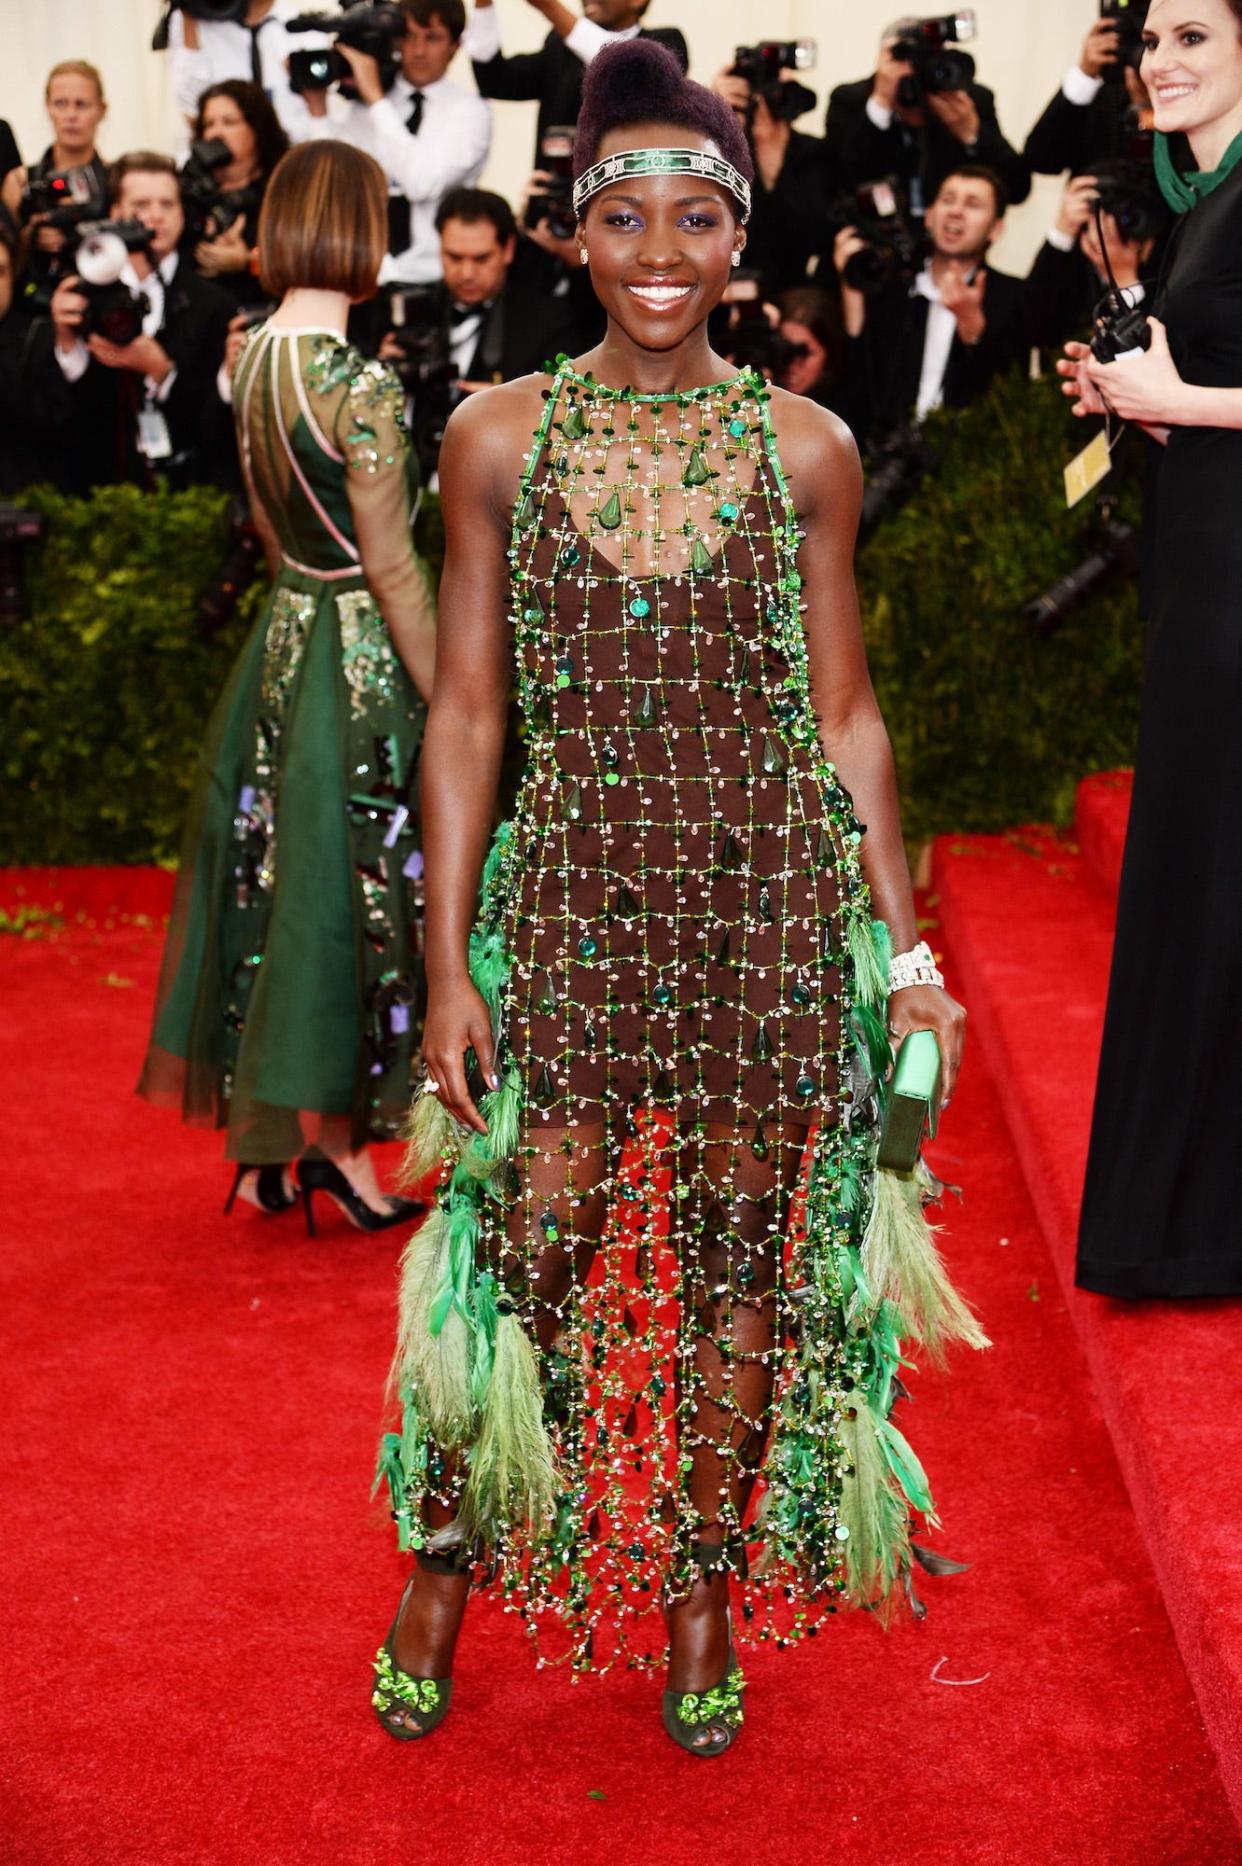 Lupita Nyong'o poses on the 2014 Met Gala, wearing a mesh, lime green flapper-style dress decked out with feathers and jewels.